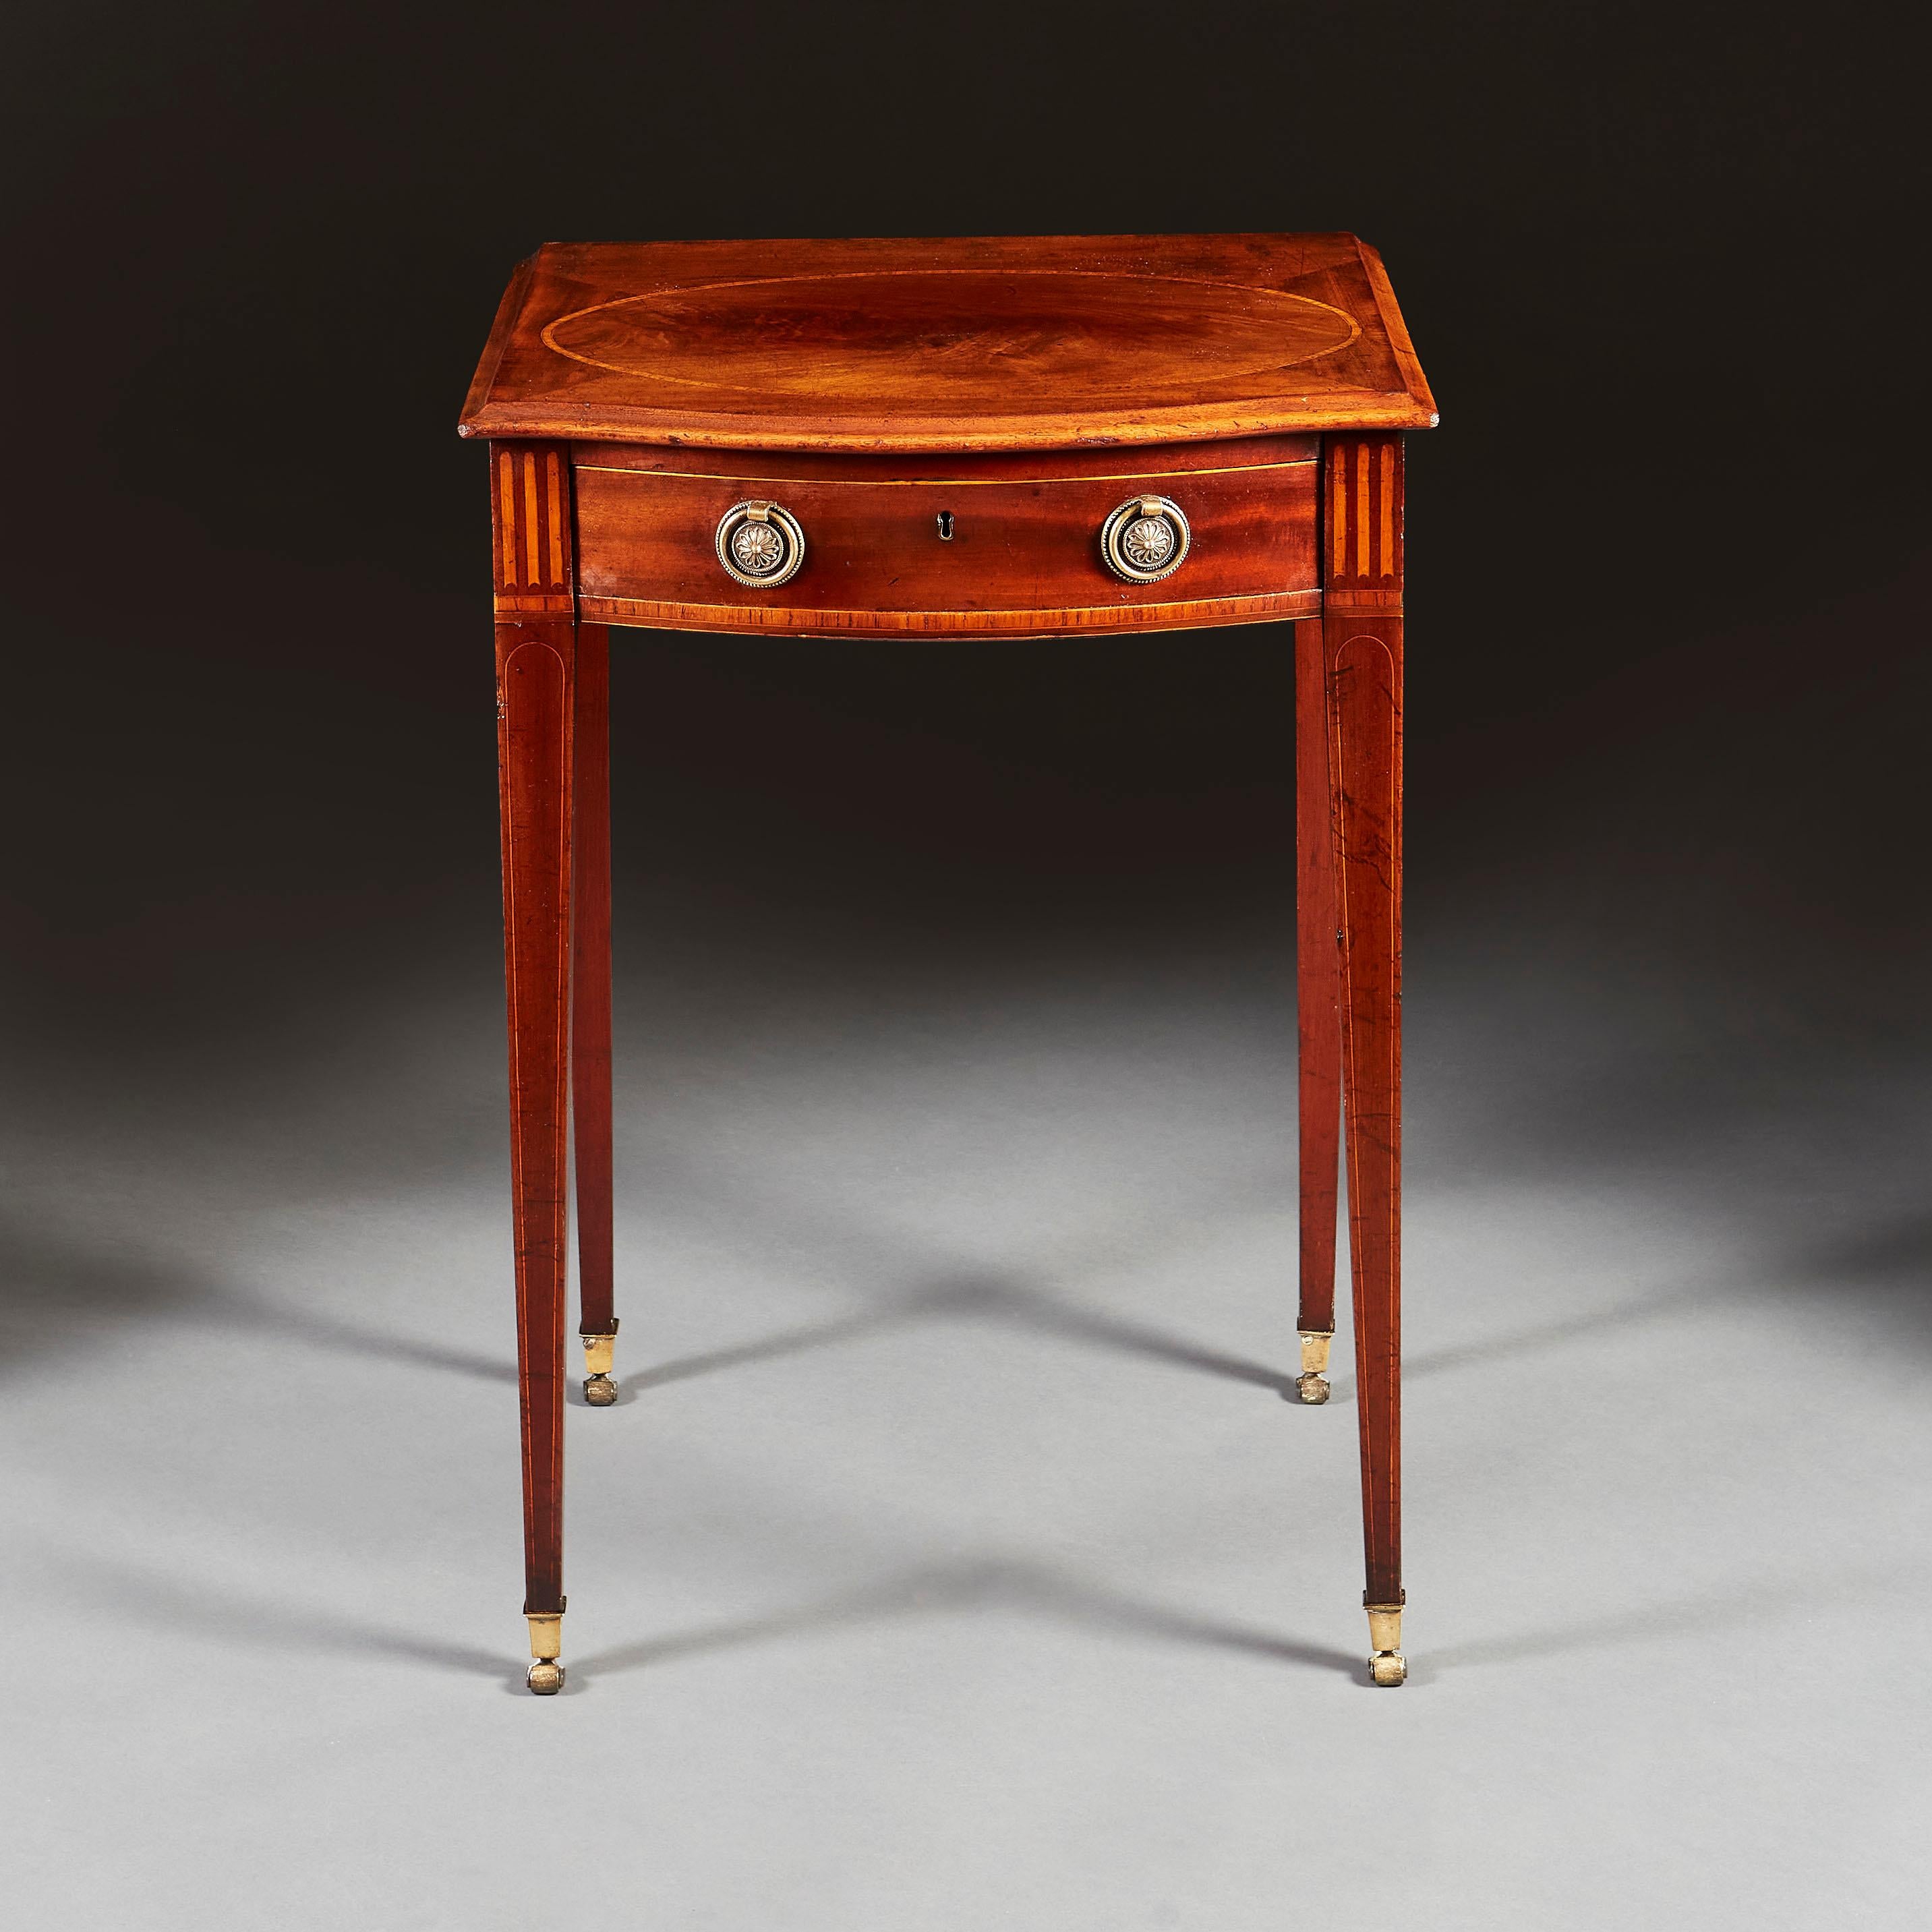 A late nineteenth century mahogany occasional table with serpentine shaped front, with satinwood stringing and a single drawer to the frieze, with brass paterae handles, all supported on four tapering legs terminating in brass castors.